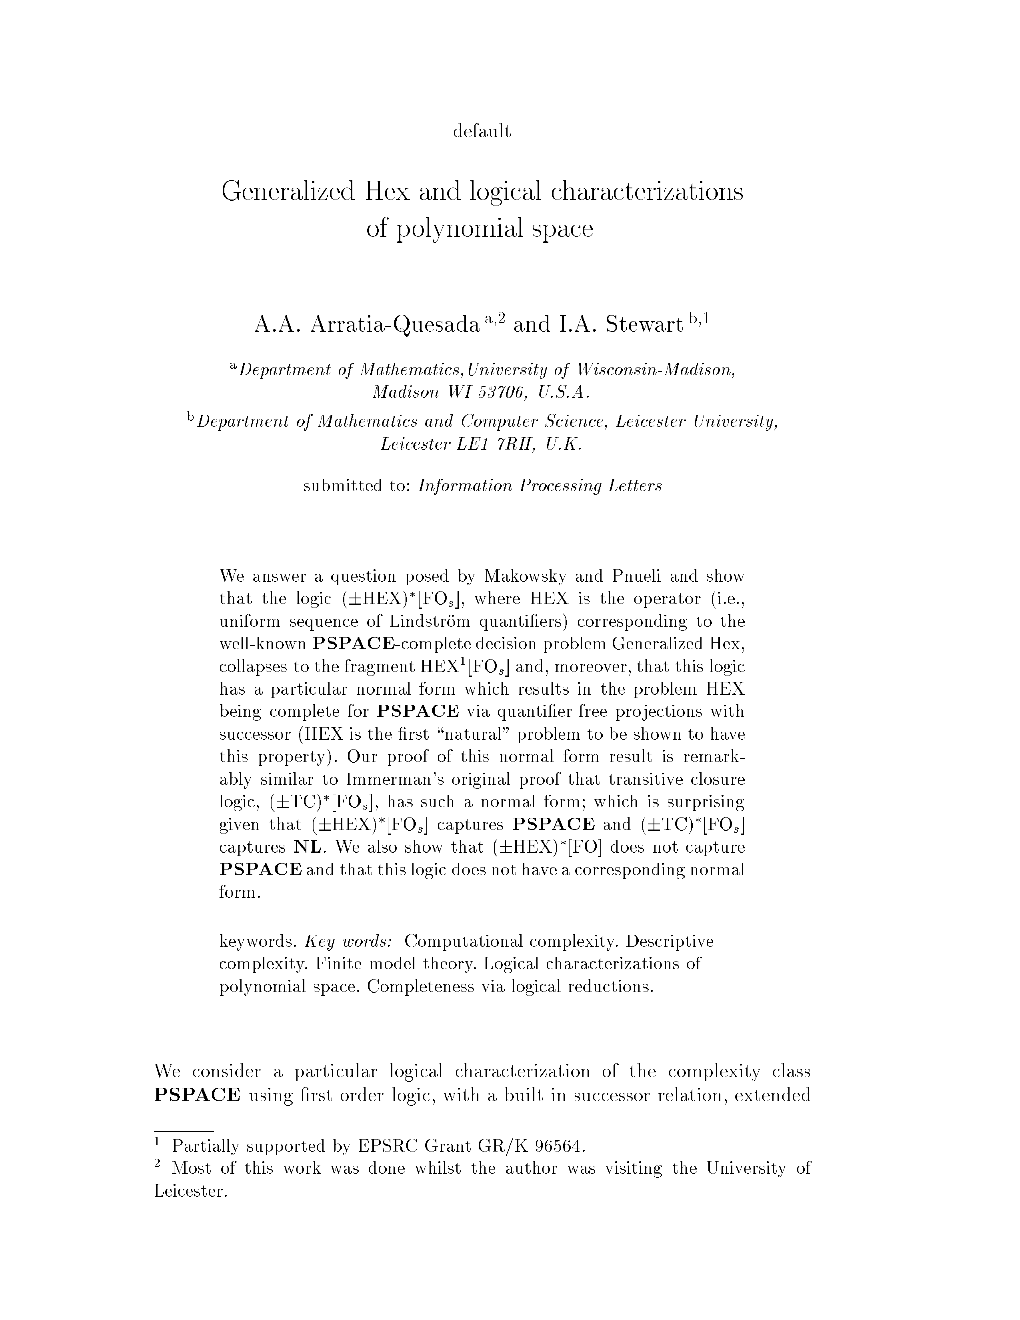 Generalized Hex and Logical Characterizations of Polynomial Space